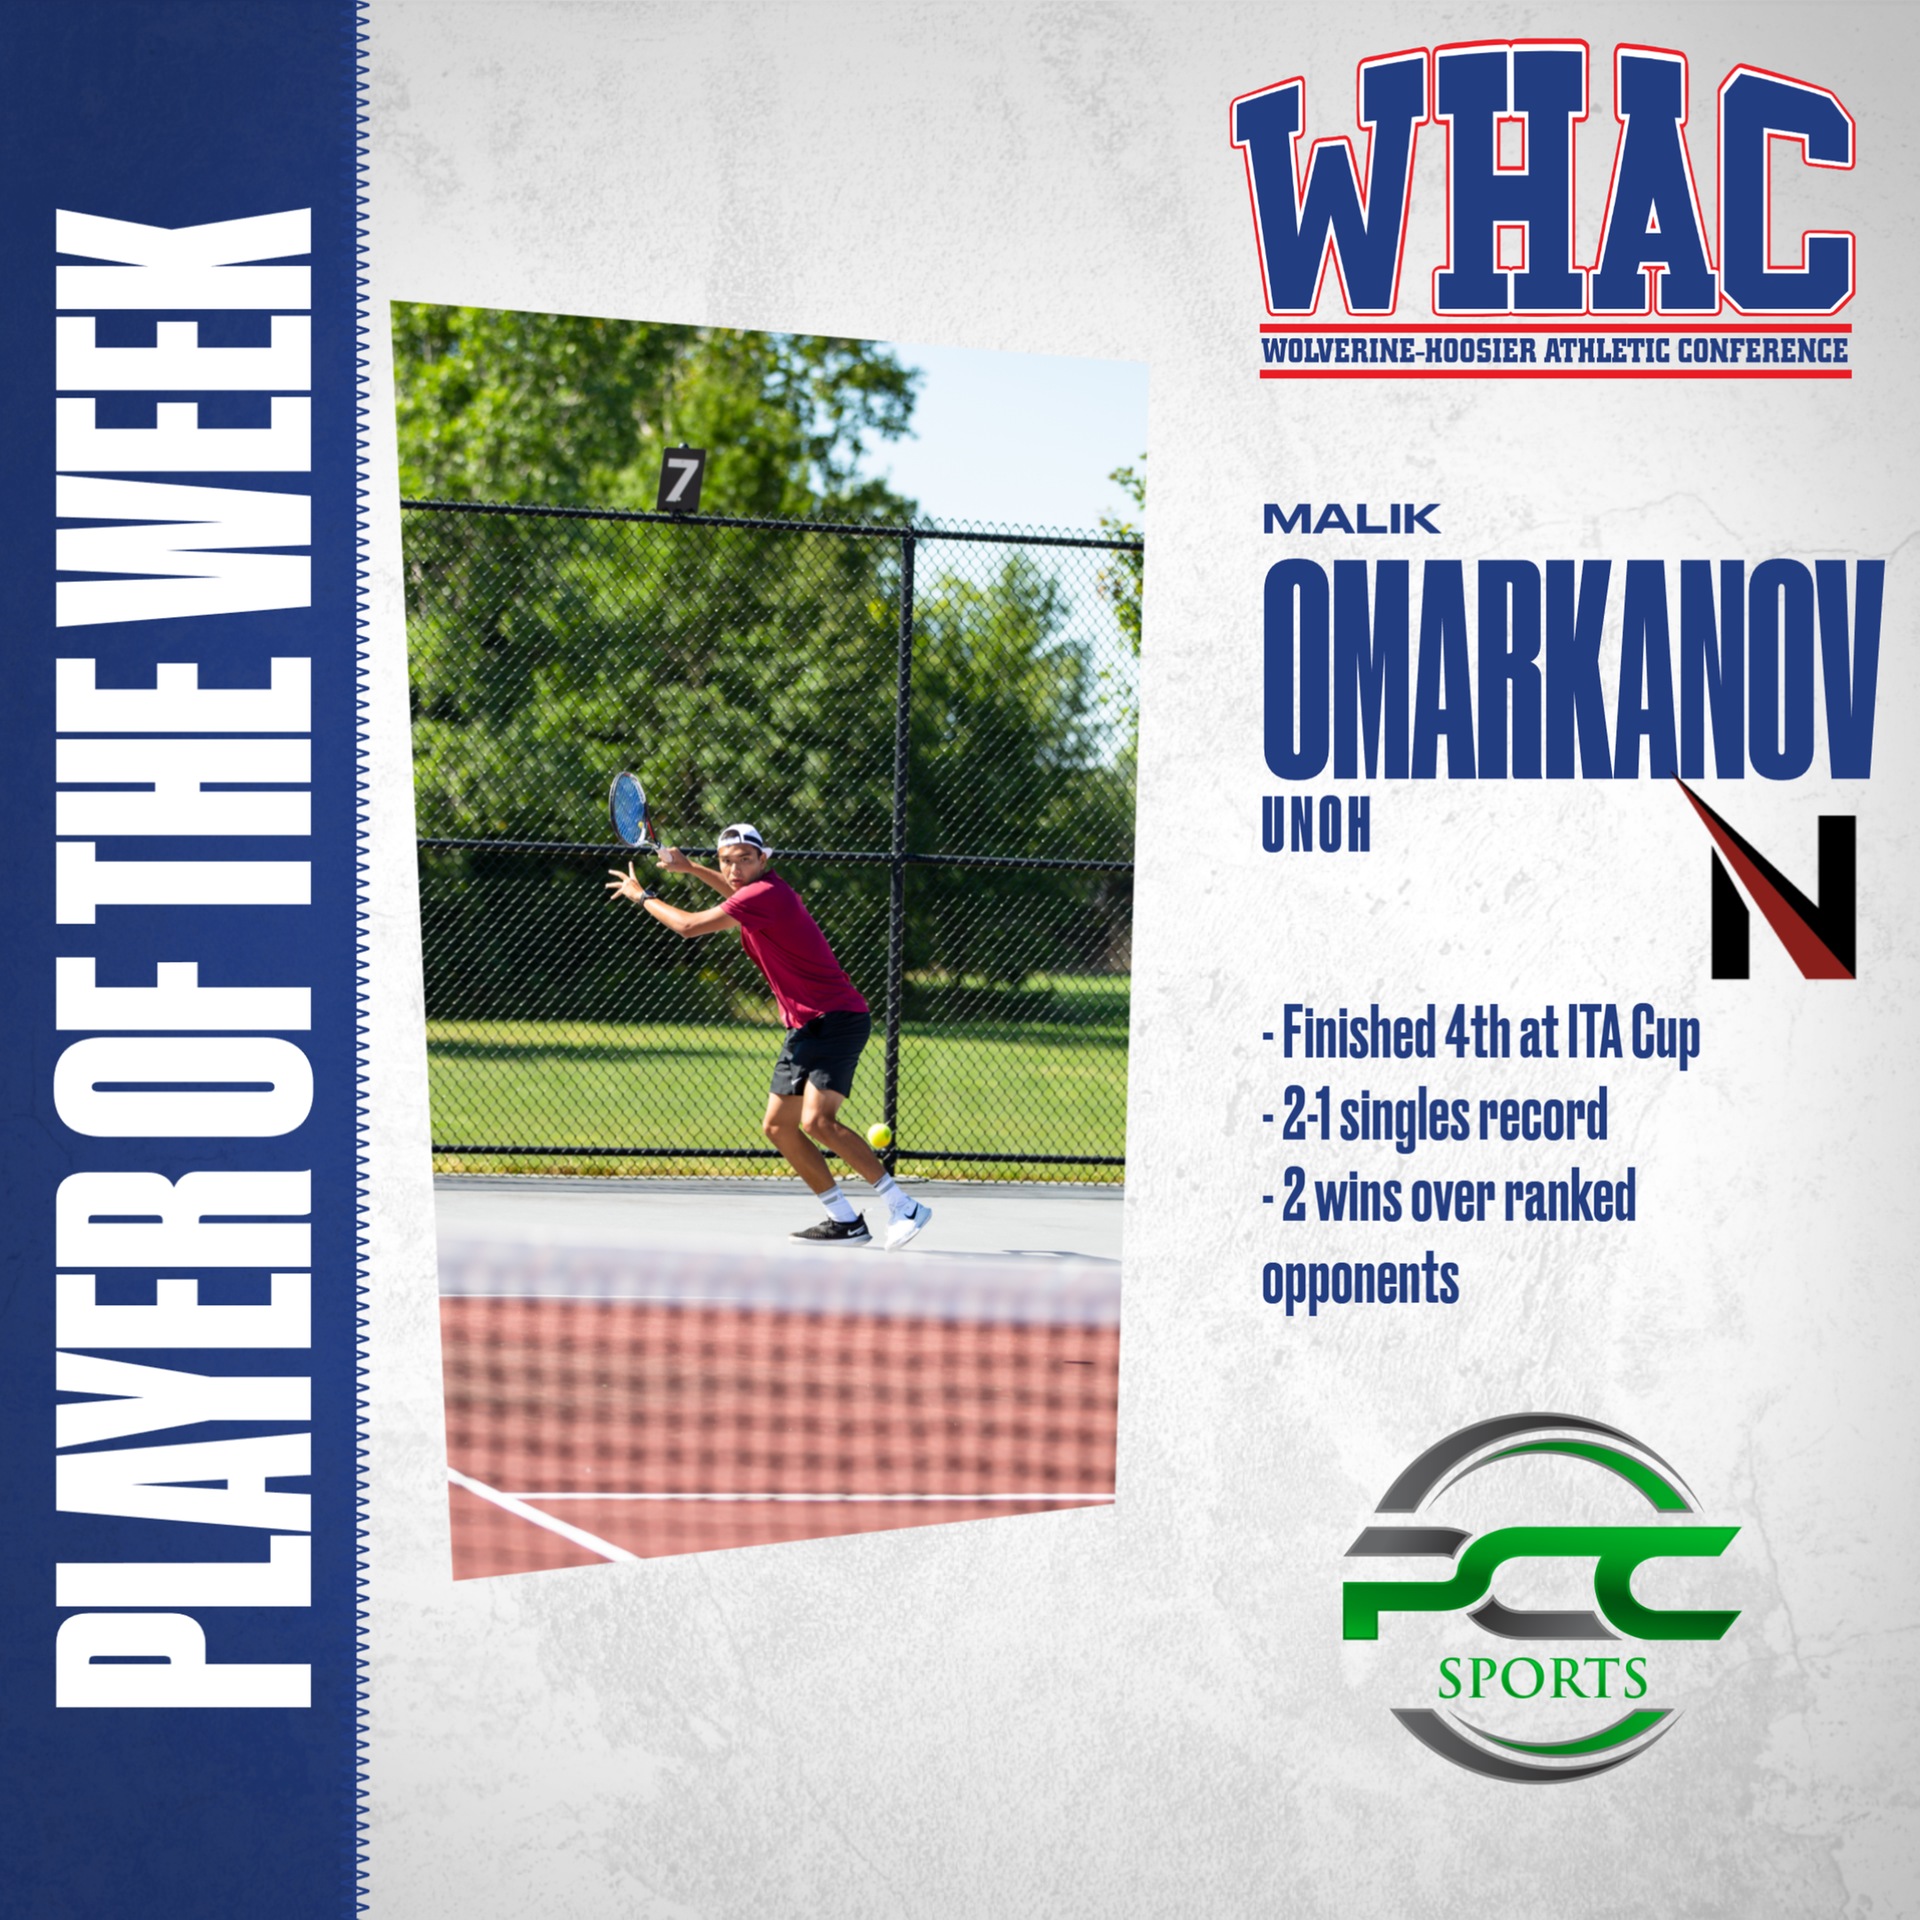 UNOH's Omarkhanov wins Player of the Week